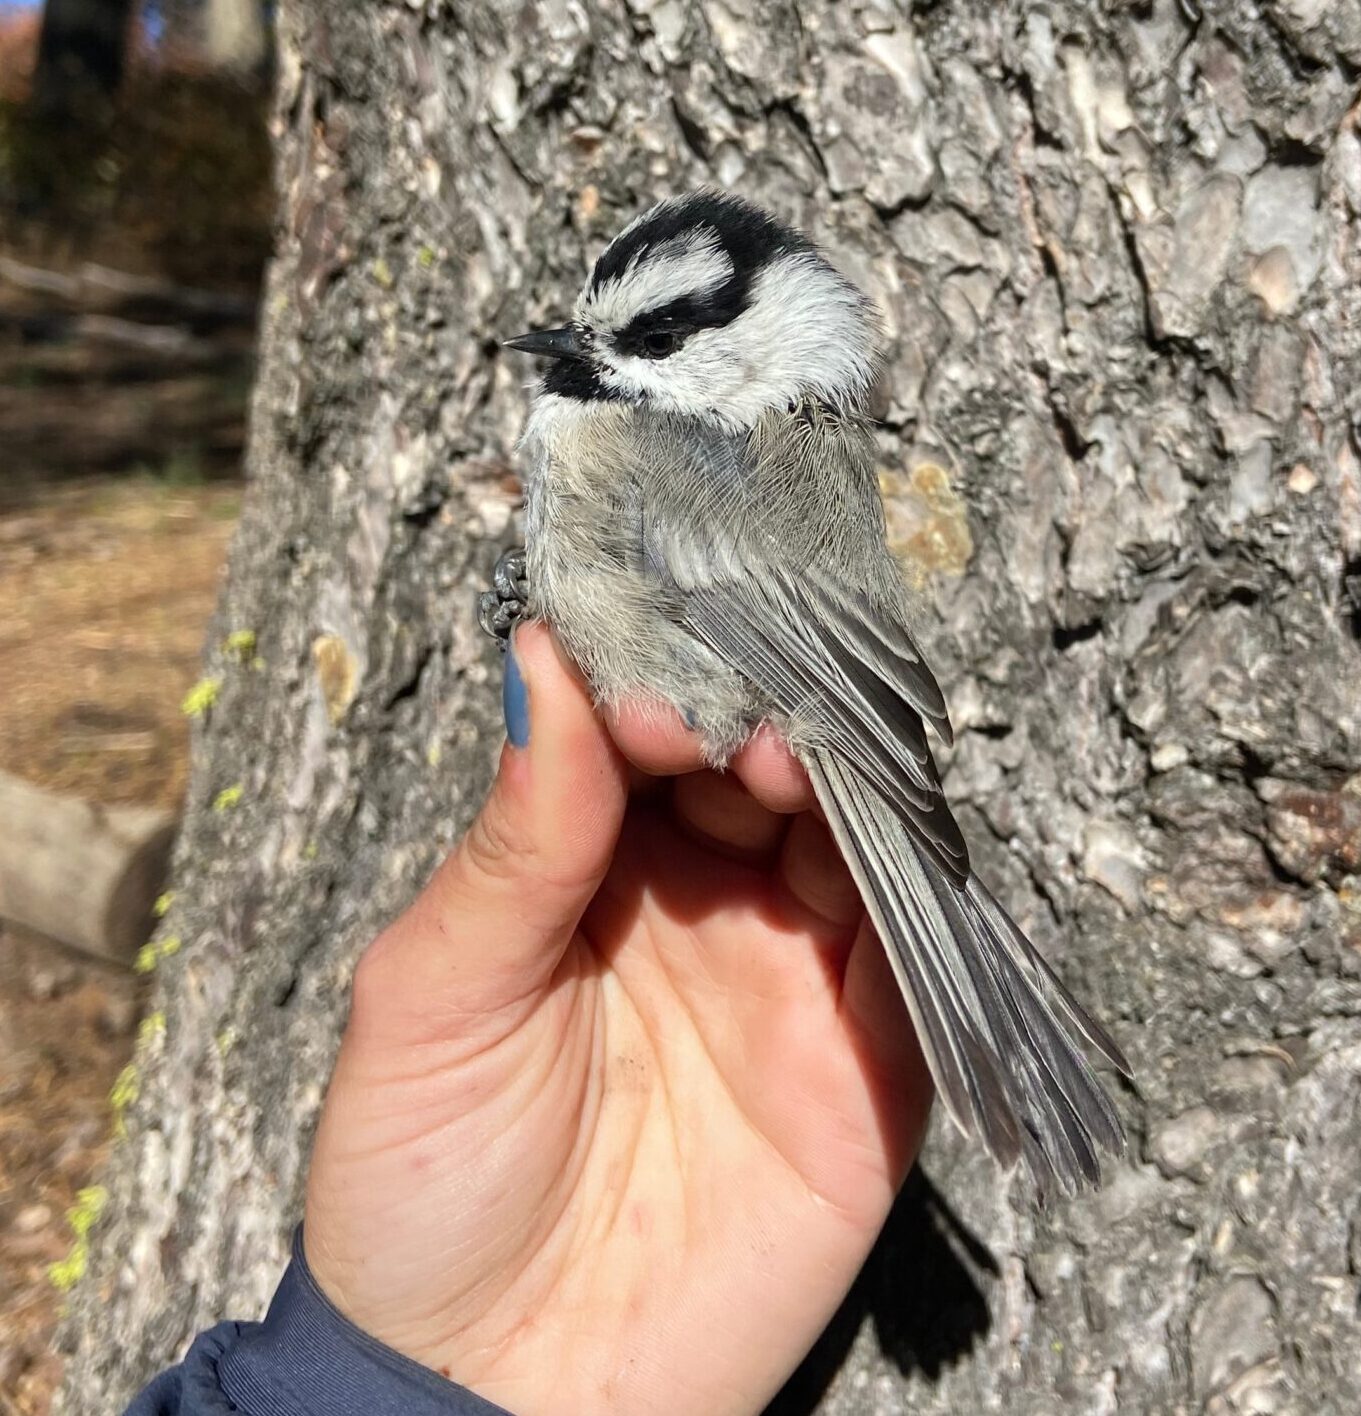 A biologist with blue nail polish holds a small gray, black and white songbird in photographer's grip for a photo. The bark of a tree trunk is in the background. You can also see a small part of the person's blue shirt sleeve